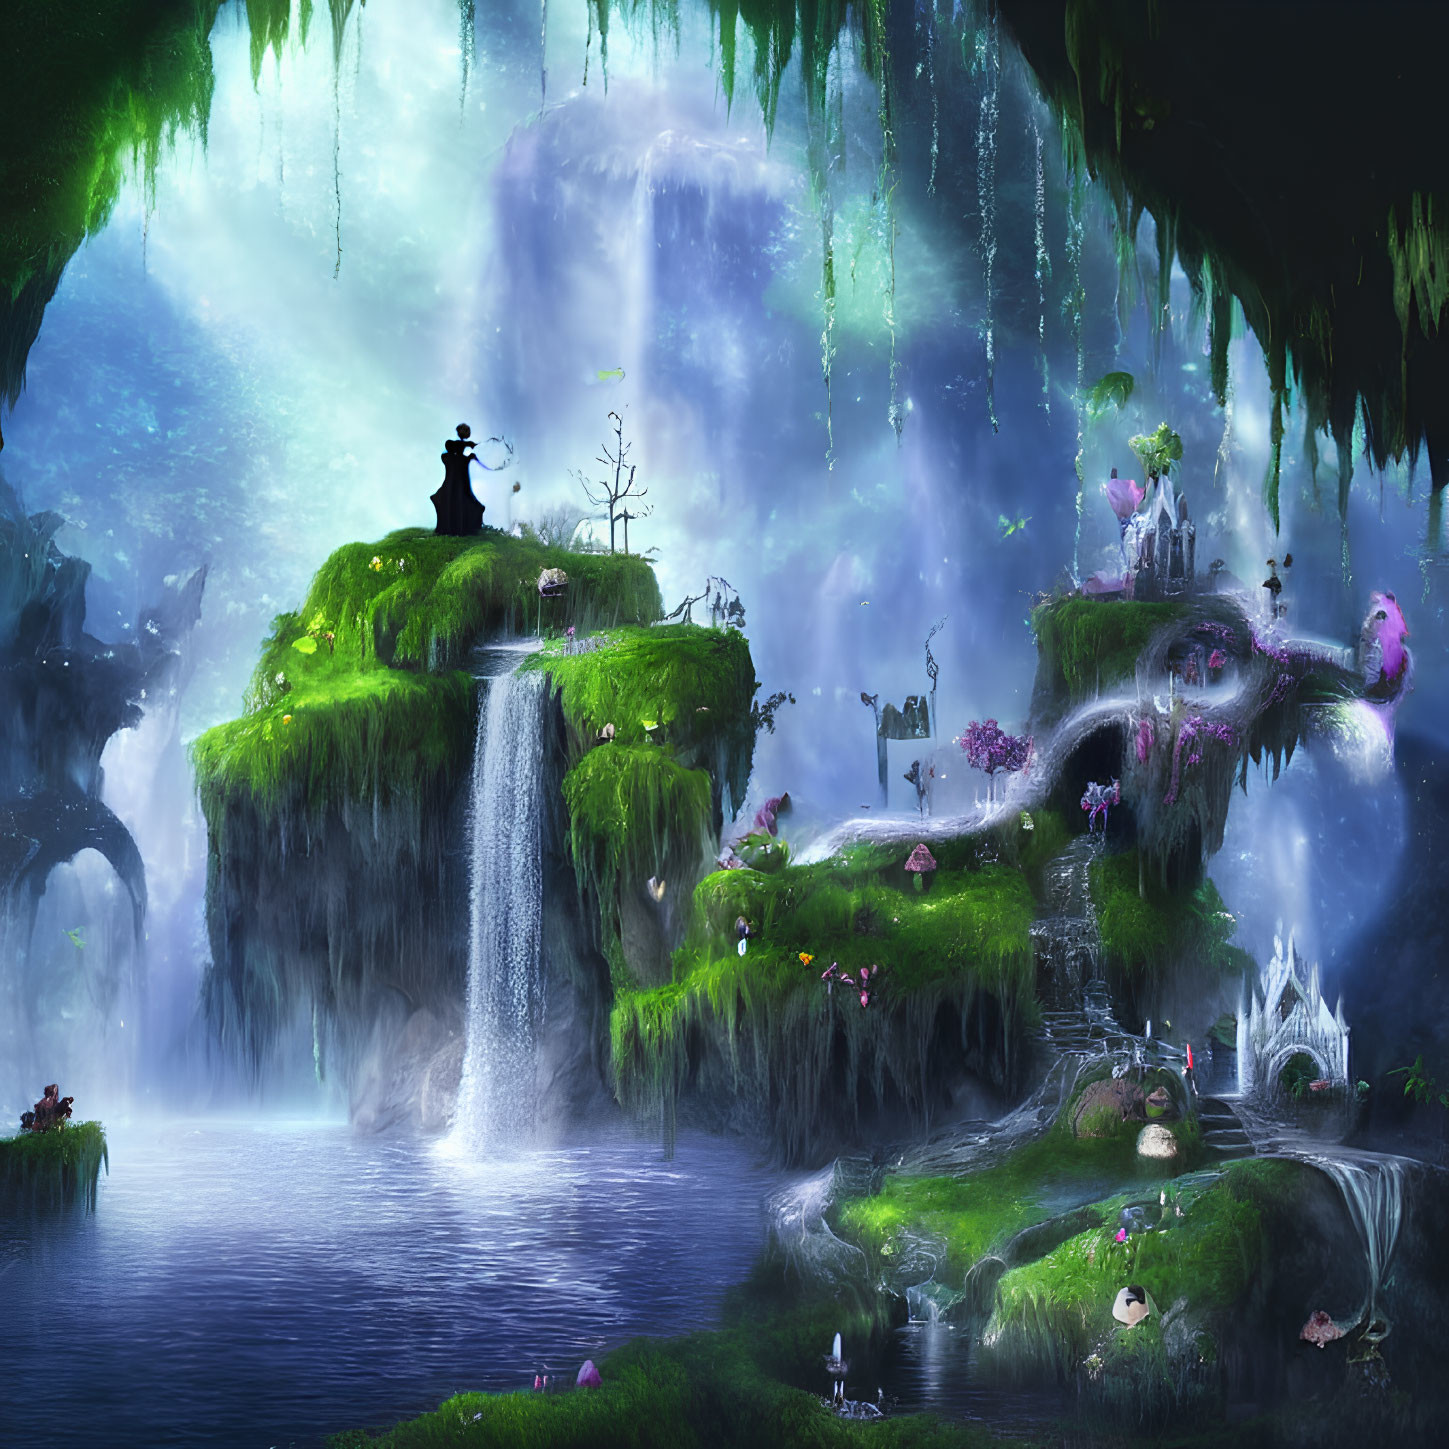 Tranquil fantasy landscape with waterfalls, lush greenery, mystical flora, and a silhouette under